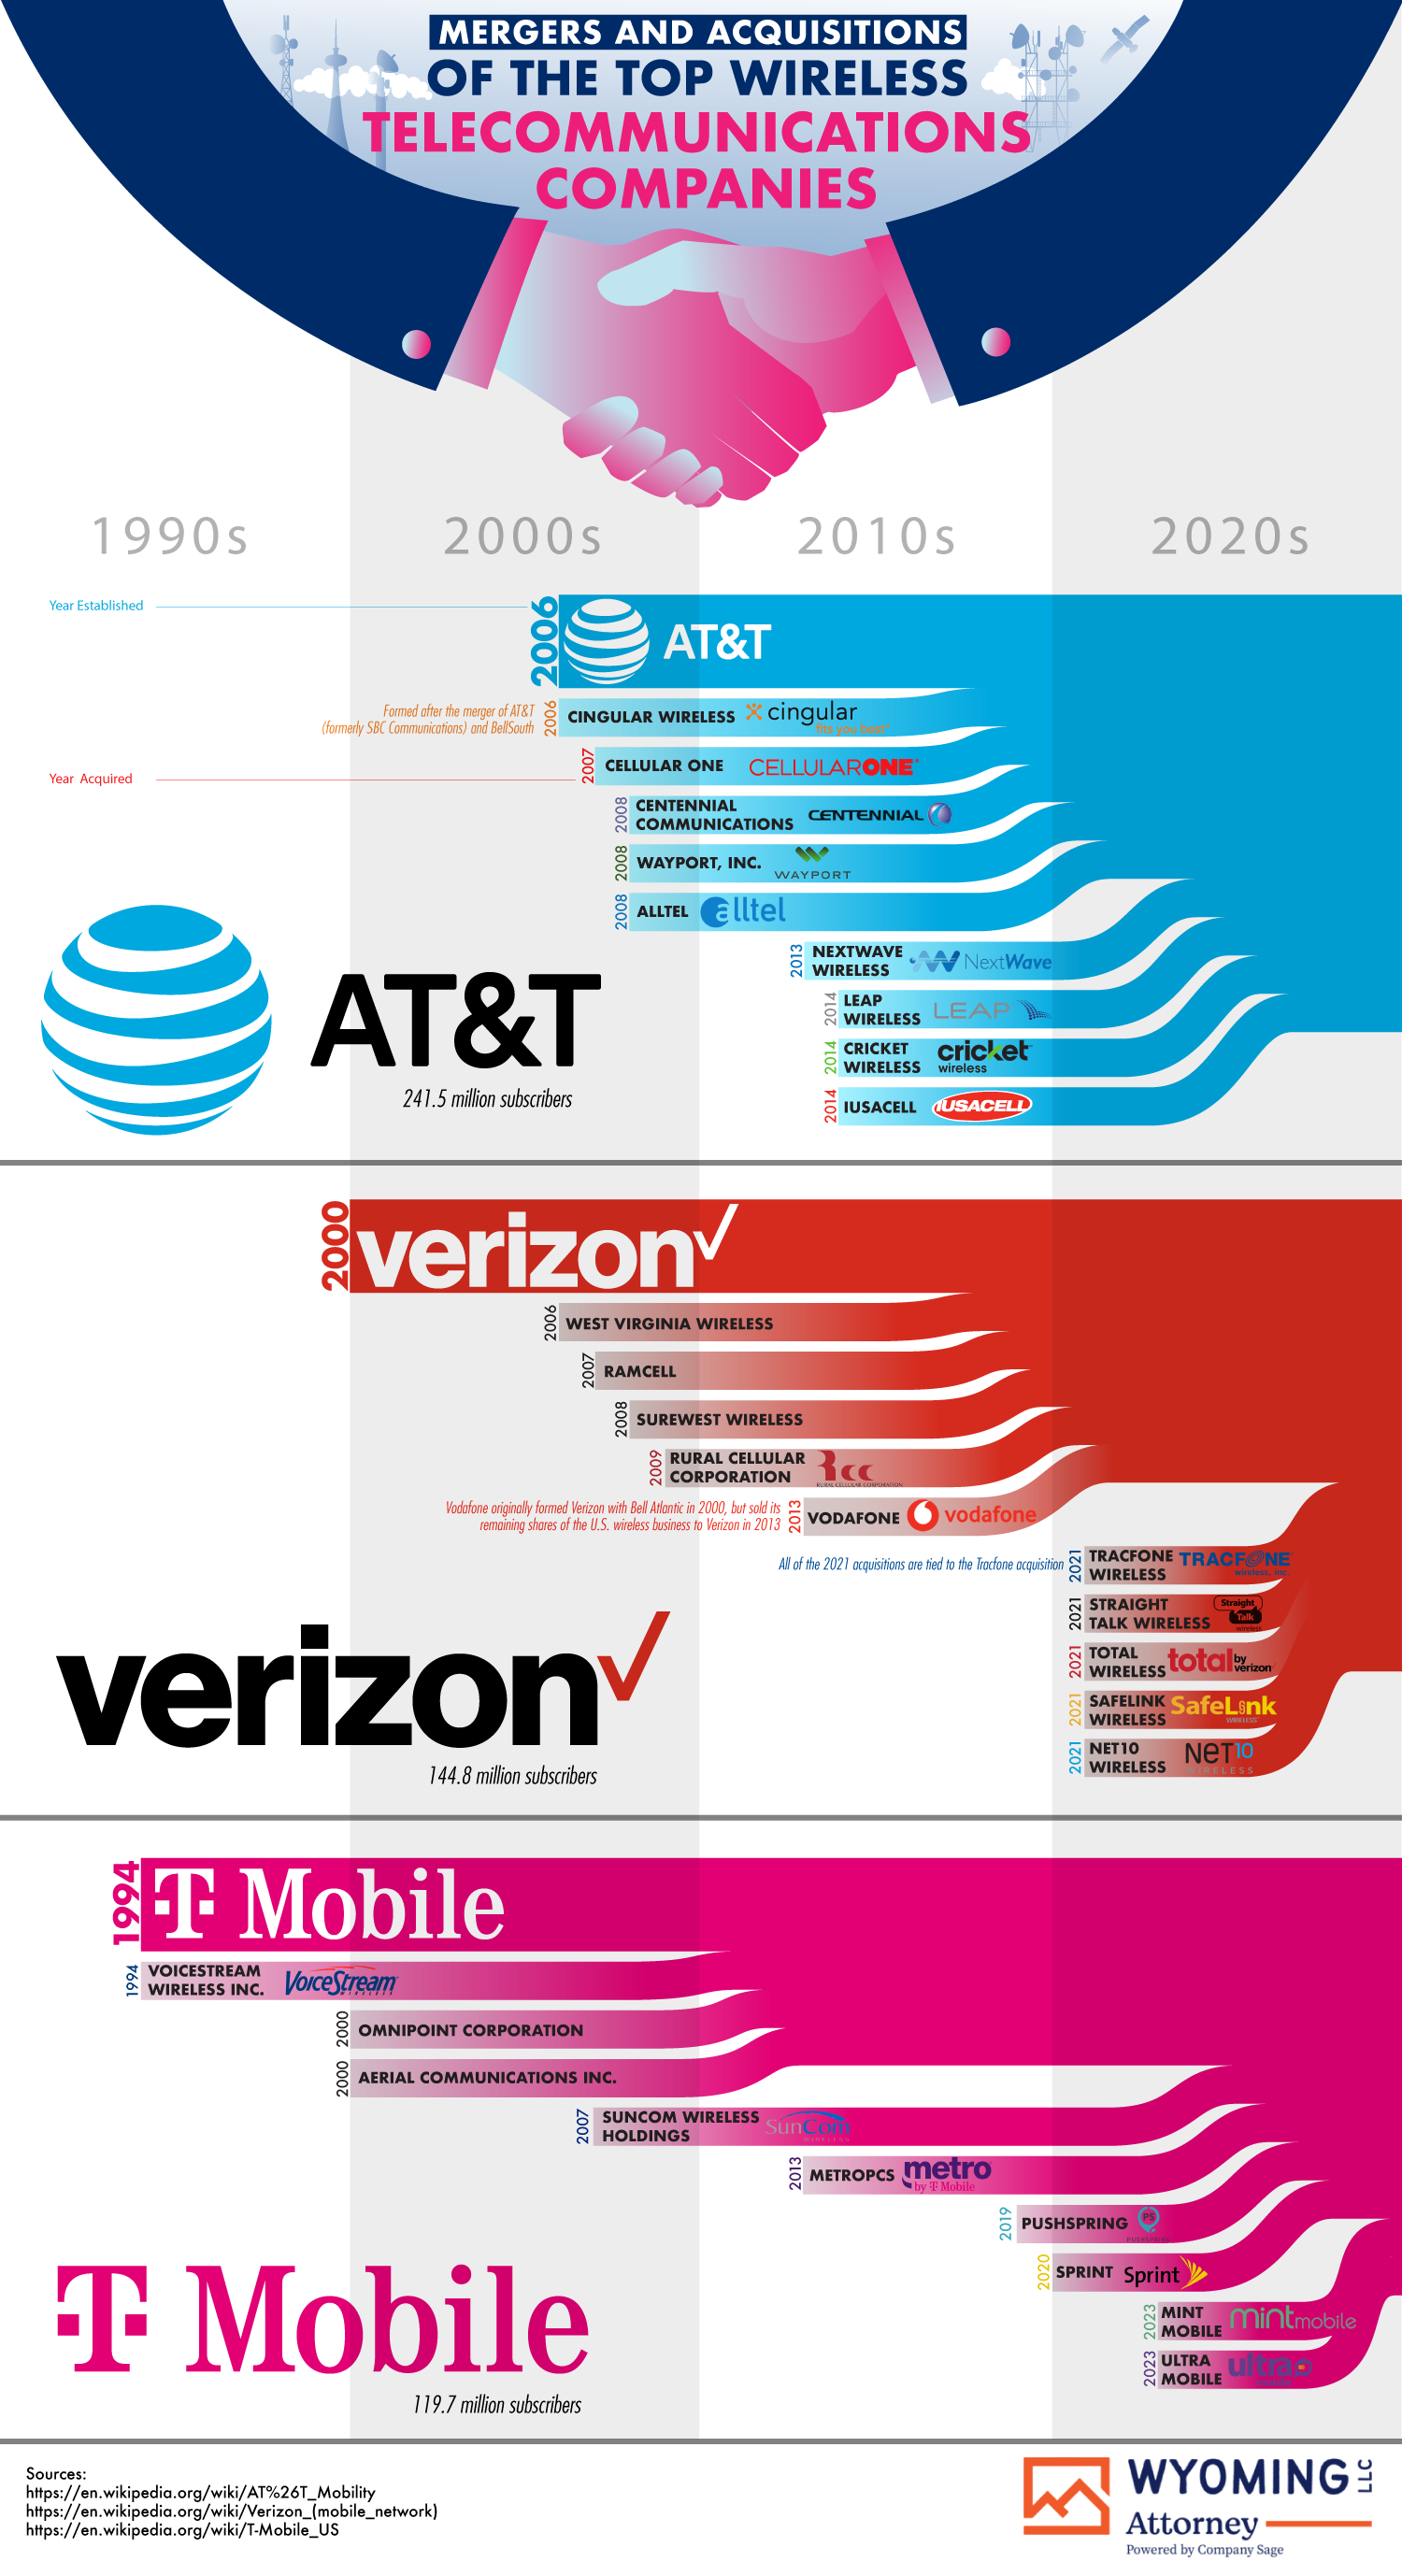 Mergers and Acquisitions of the Top Wireless Telecommunications Companies - Wyoming LLC Attorney Asset Protection - Infographic